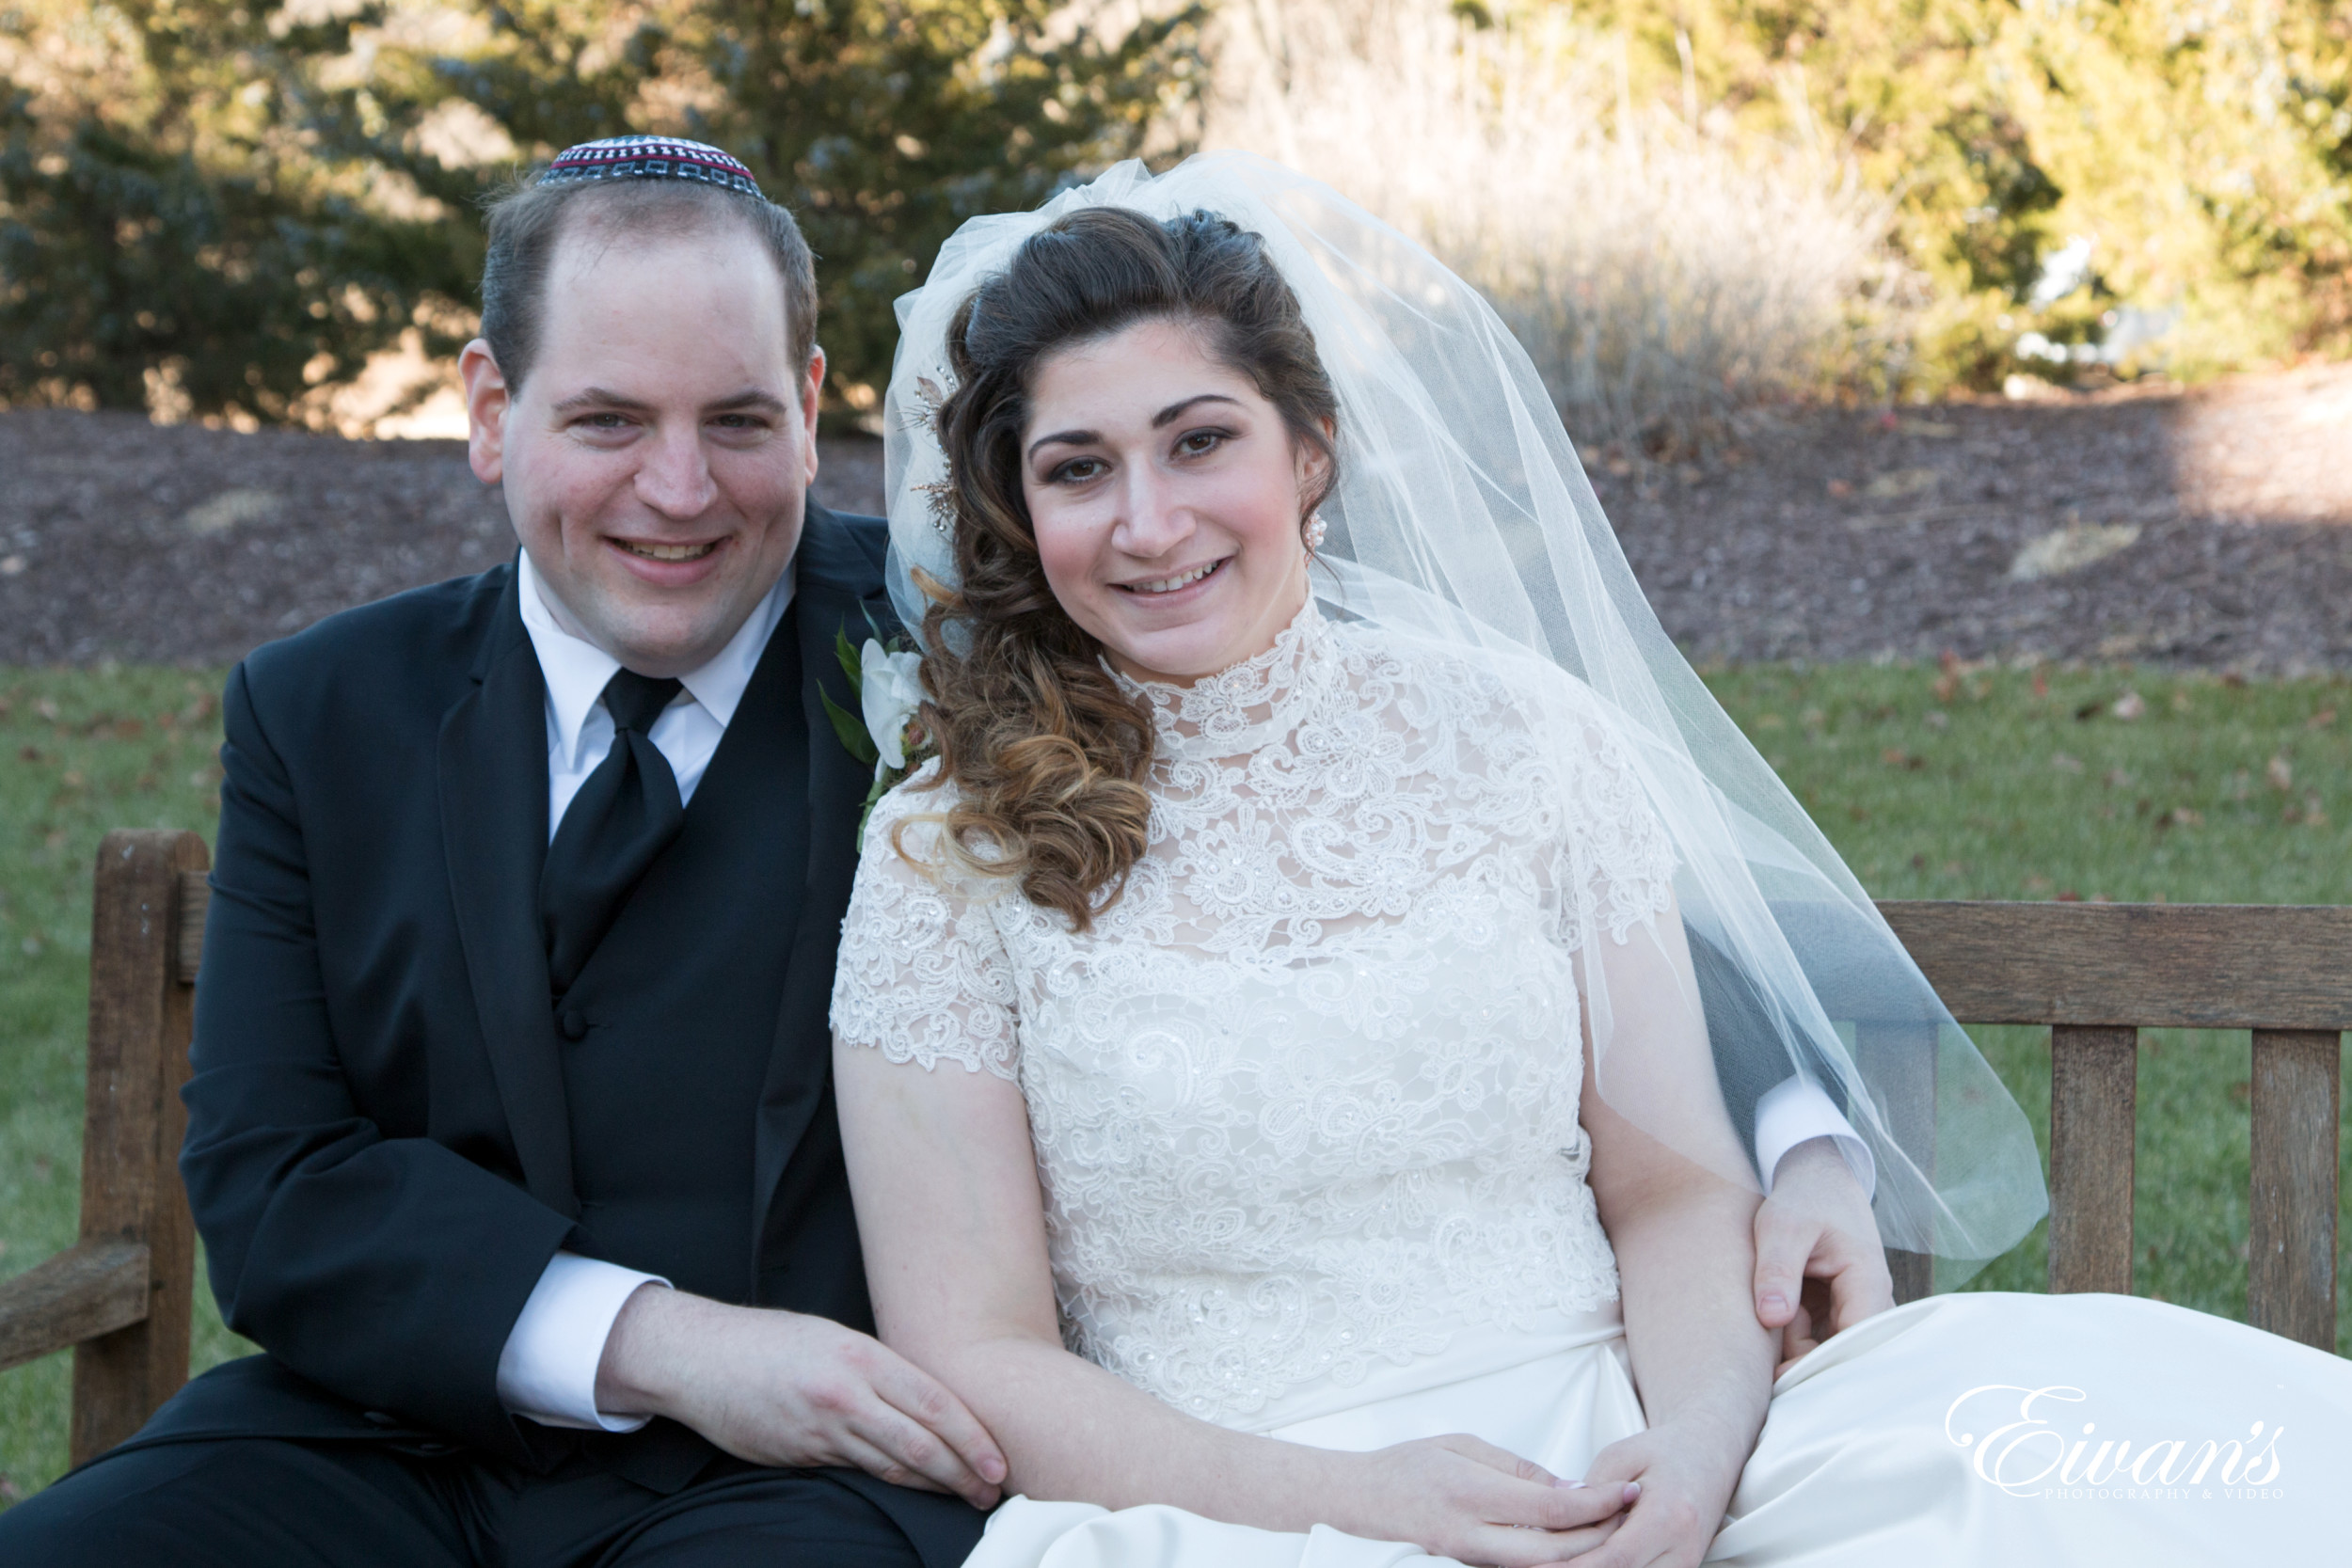 Your guide to Jewish Wedding Traditions from A to Z